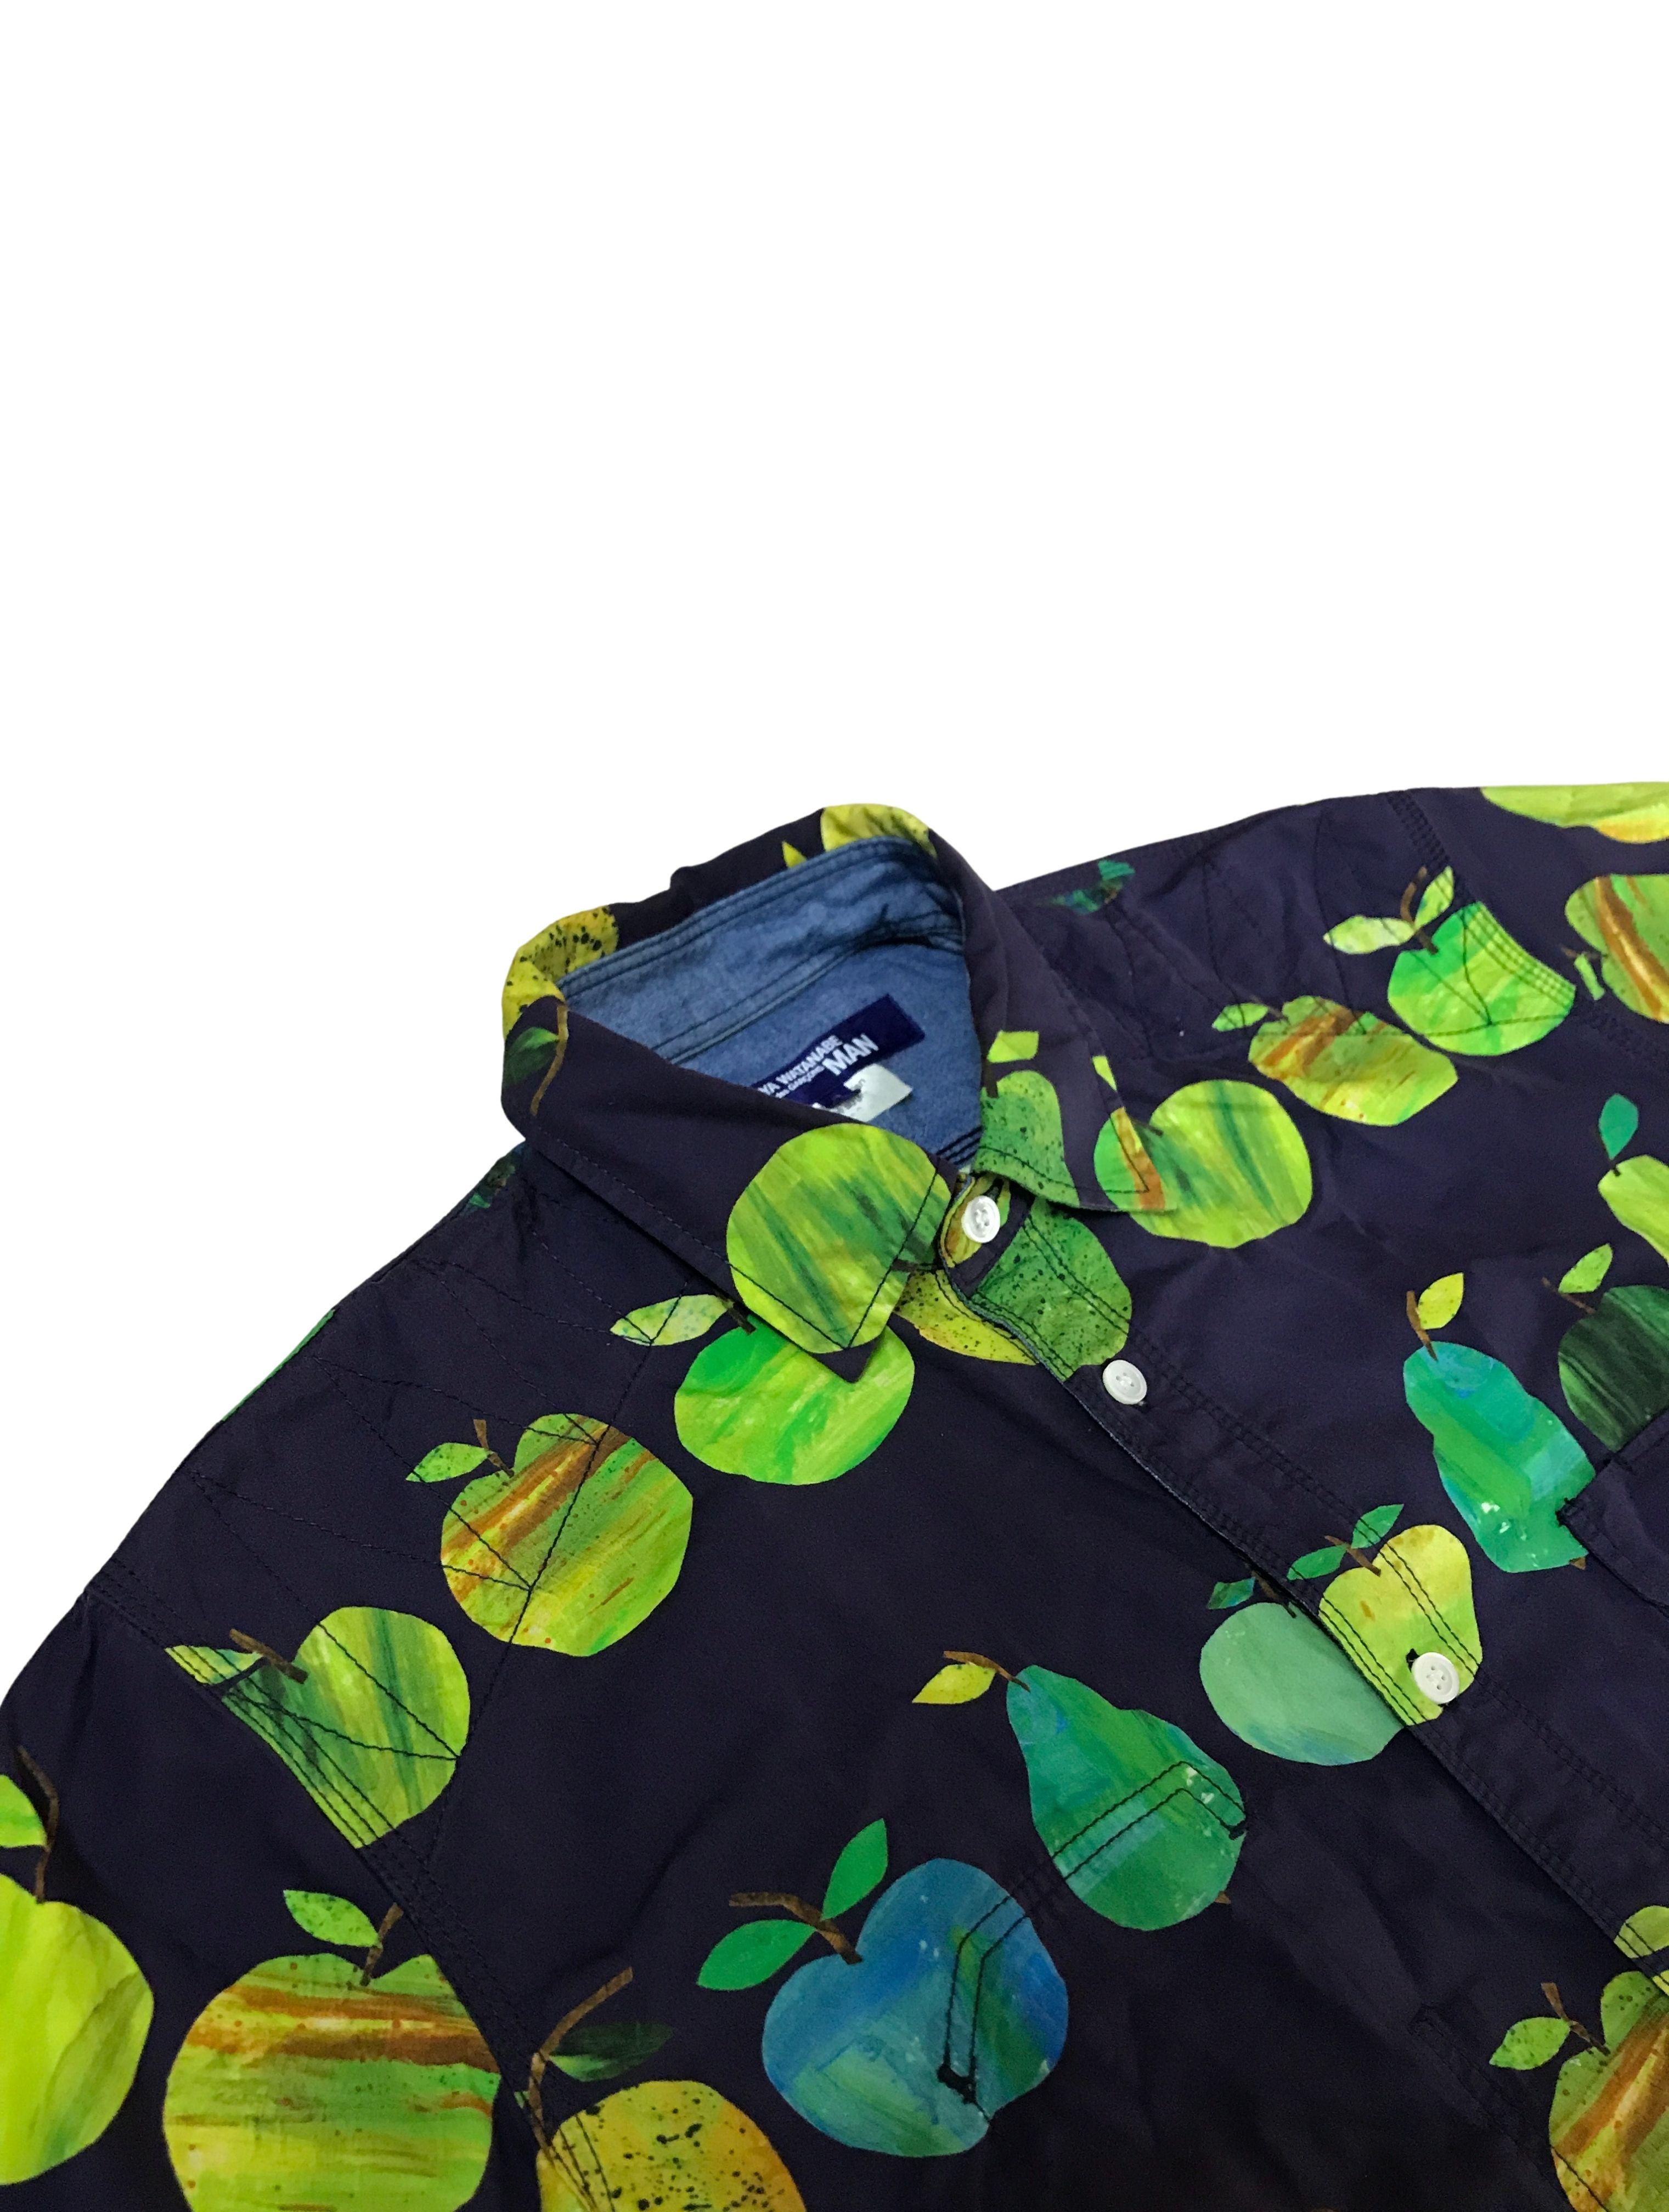 Junya Watanabe MAN Pear Print Shirt, Spring Summer 2019 In Excellent Condition For Sale In Seattle, WA